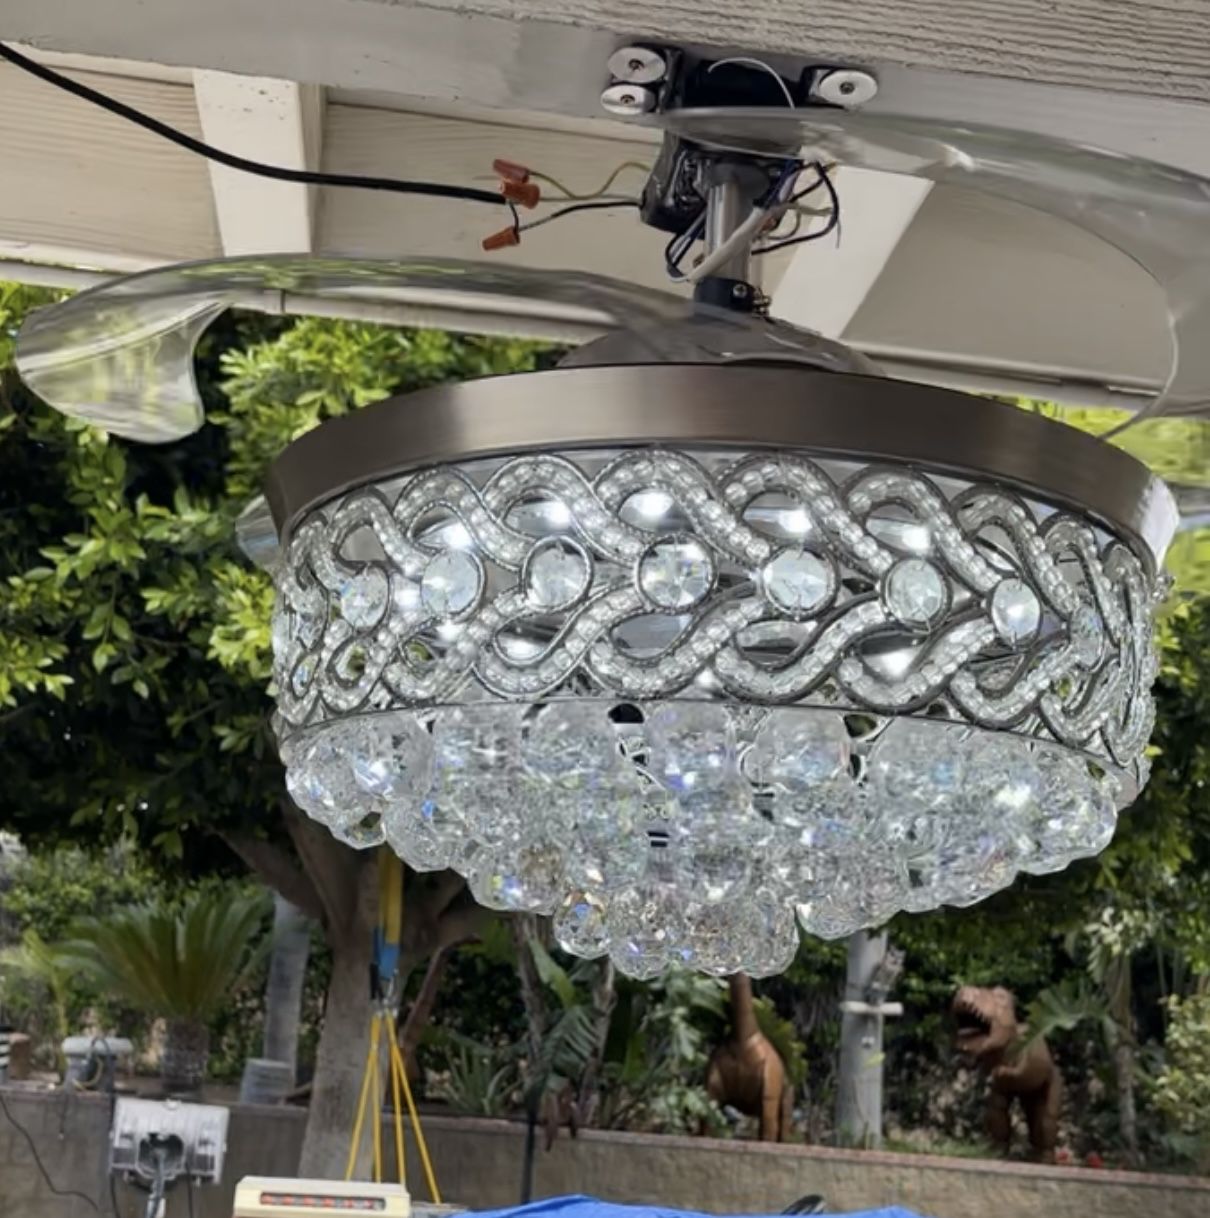 Beautiful Chandelier Retractable Fan. Blade Goes In When Stops And Retracts Out. $50 Firm 